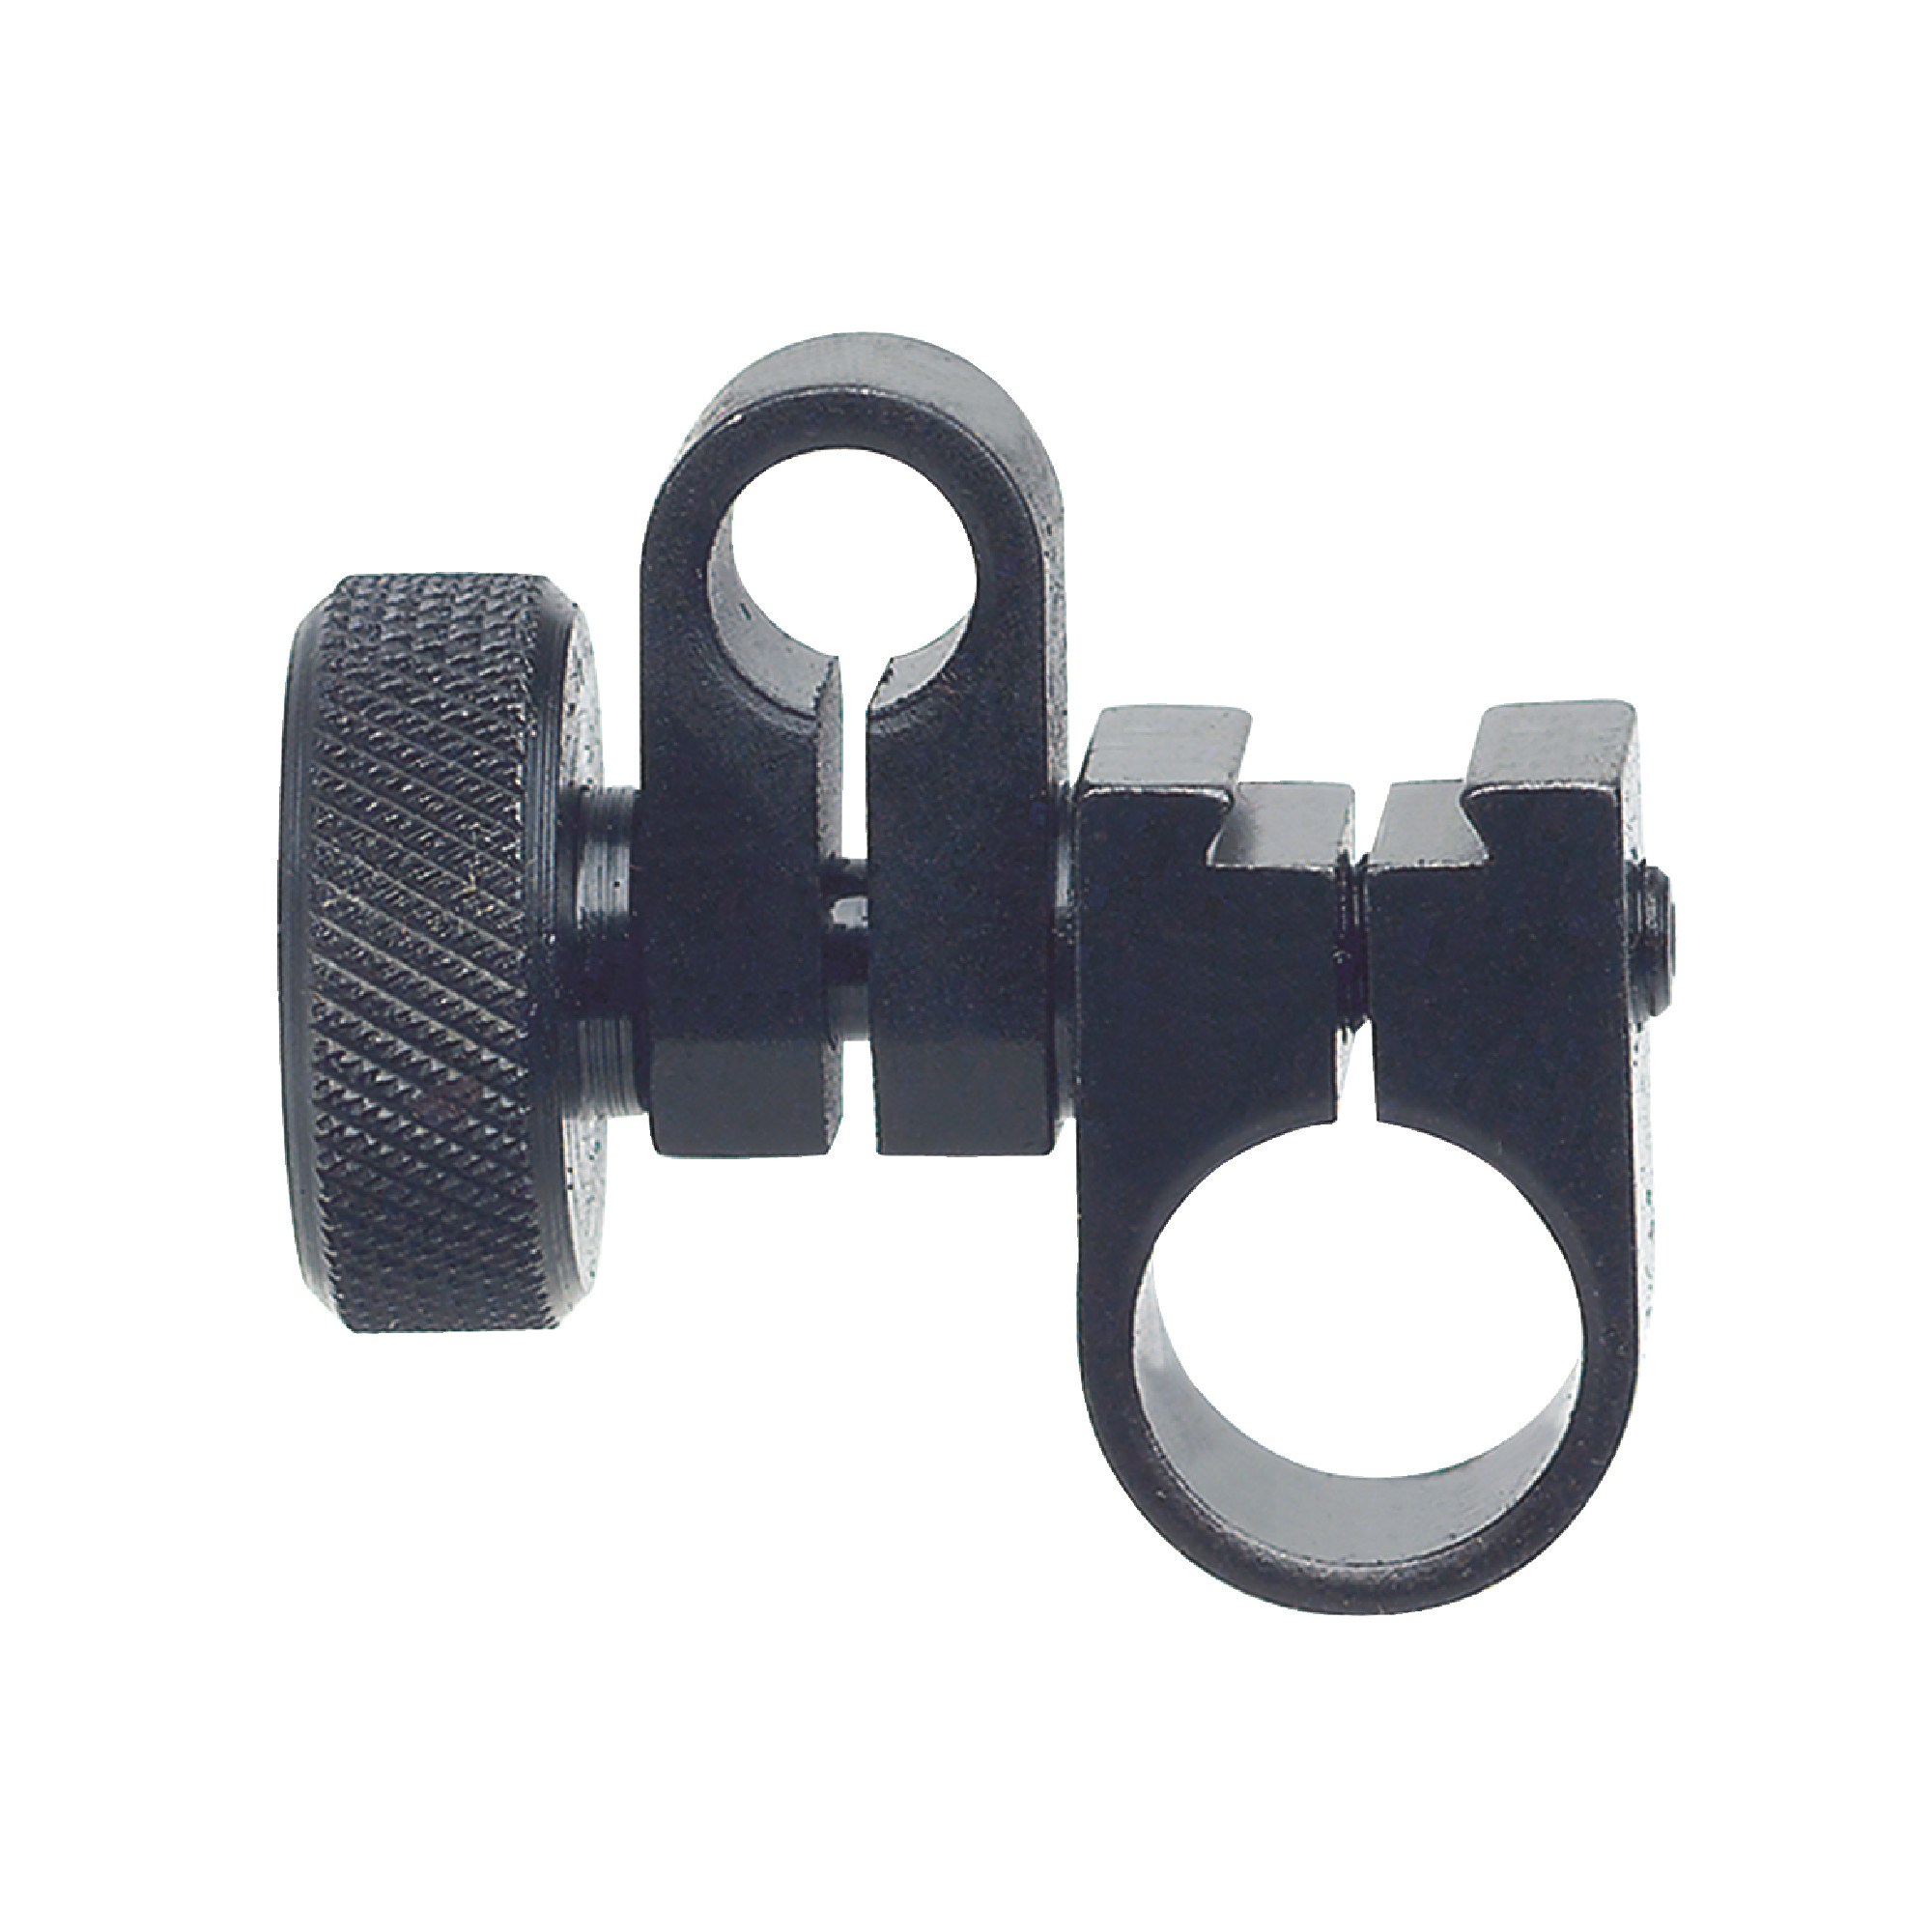 Swivel Clamp for Dial Test Indicator